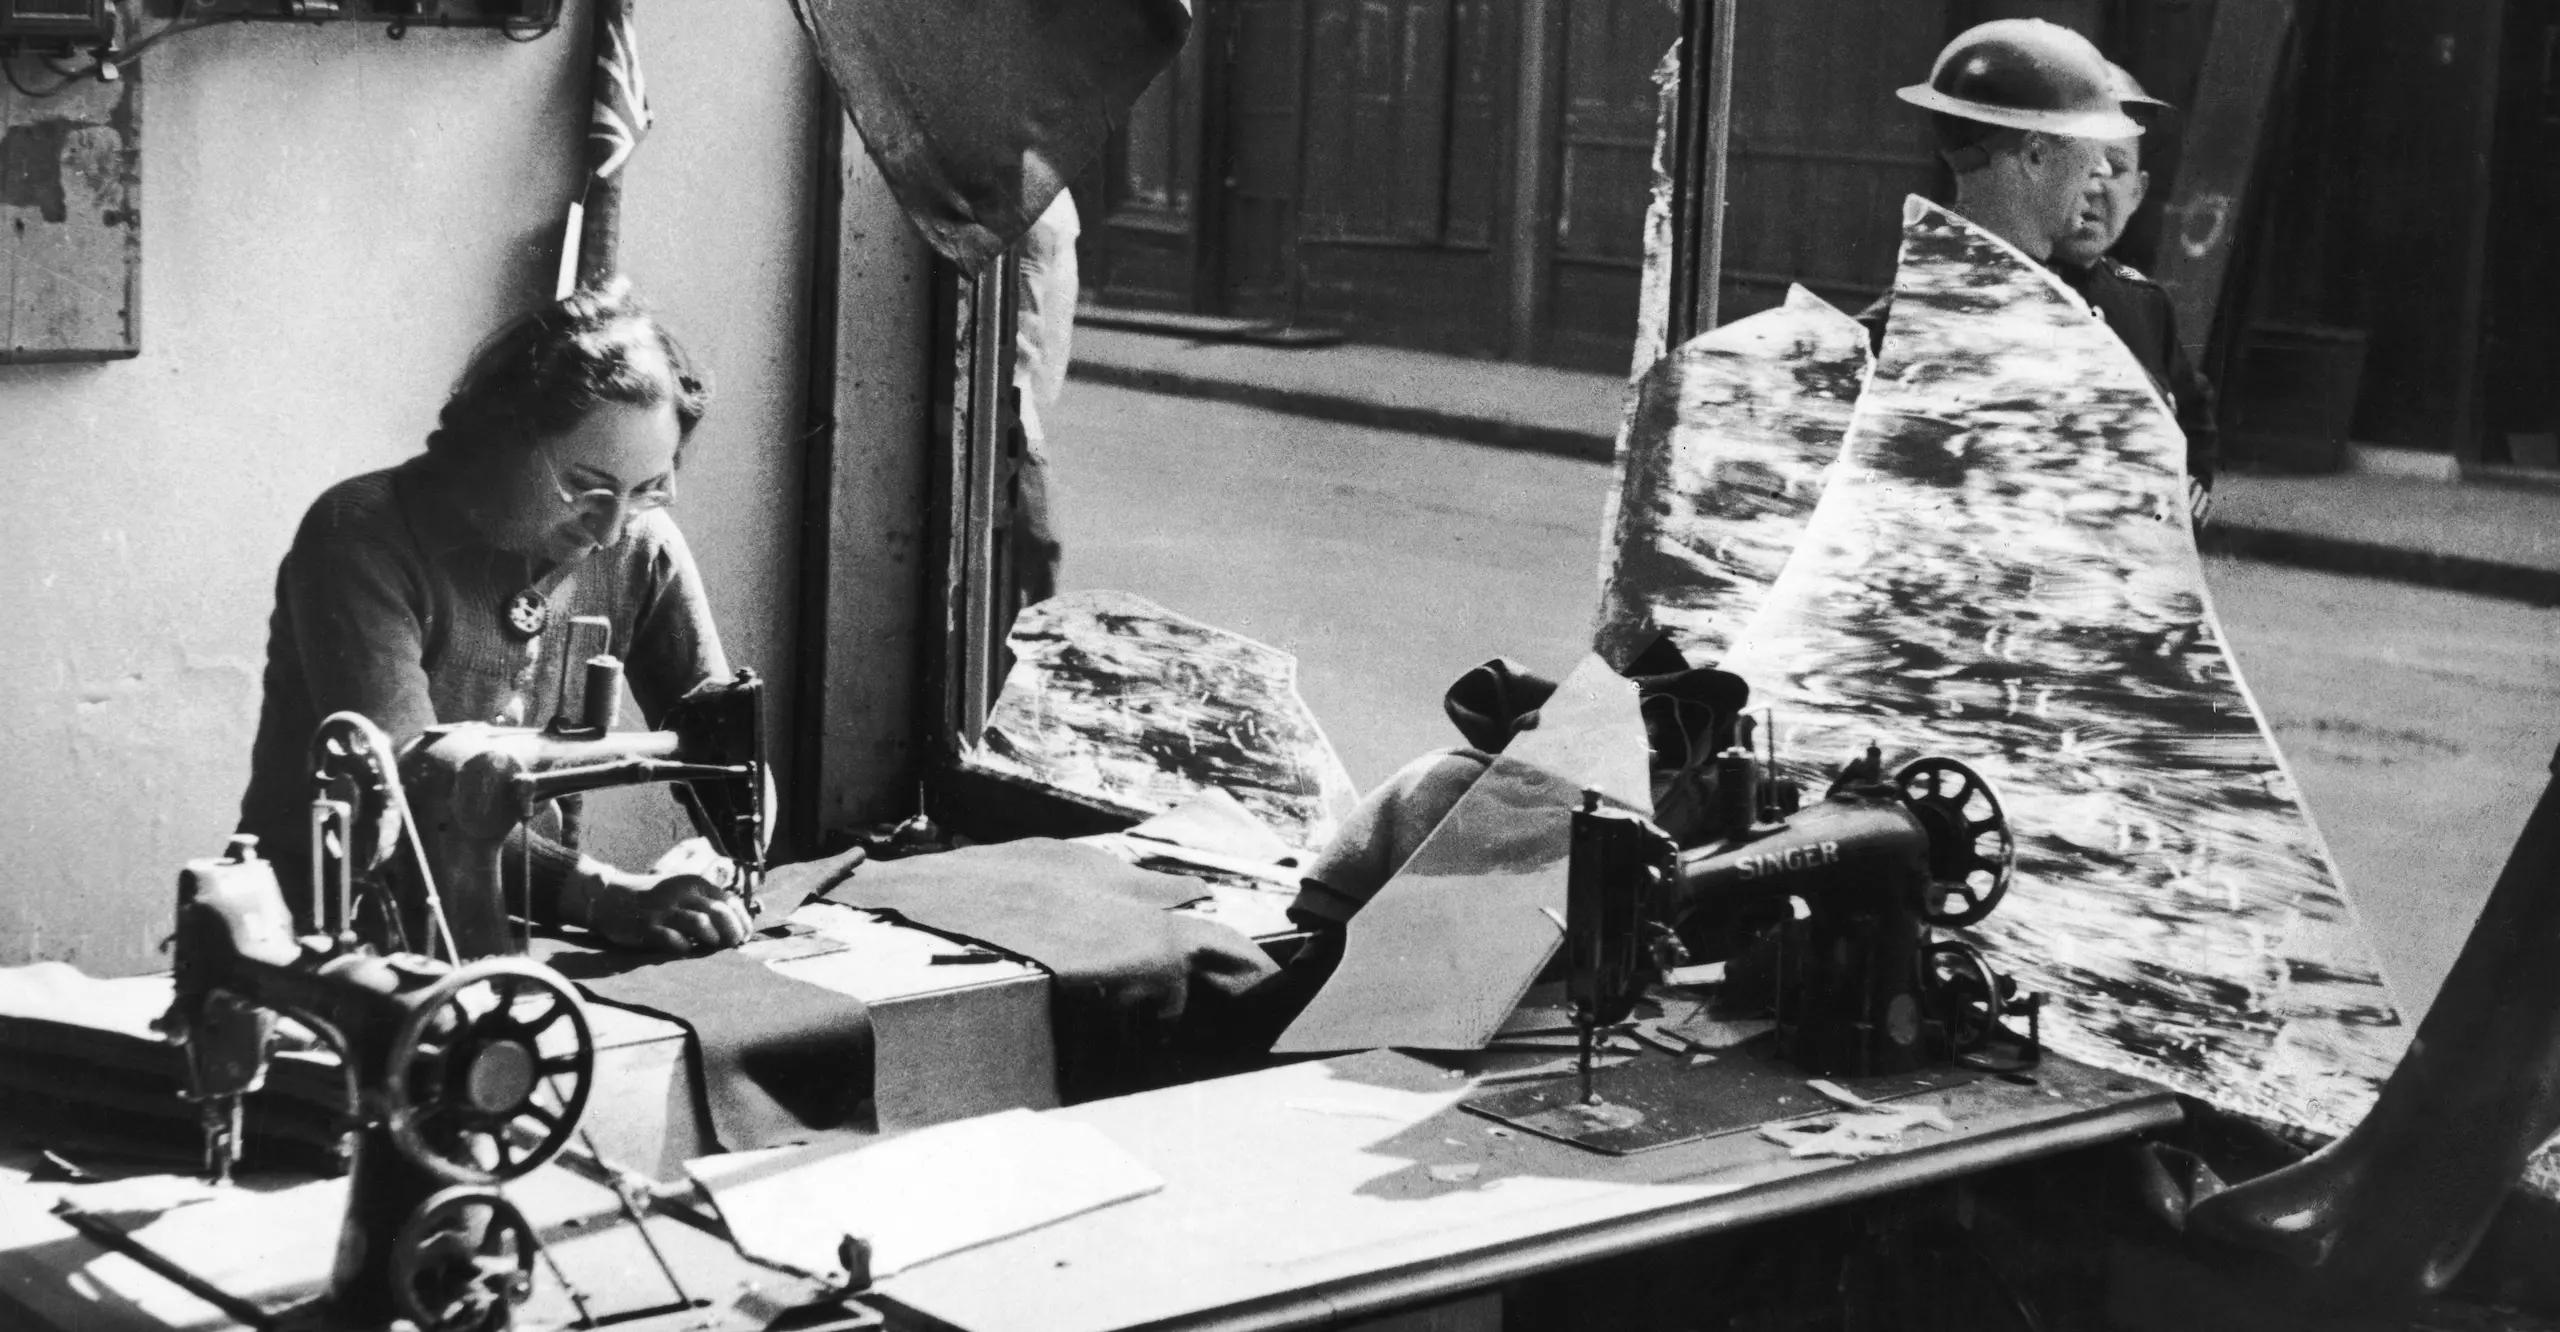 Black and white photograph of a woman working amongst the broken glass of a tailor’s shop